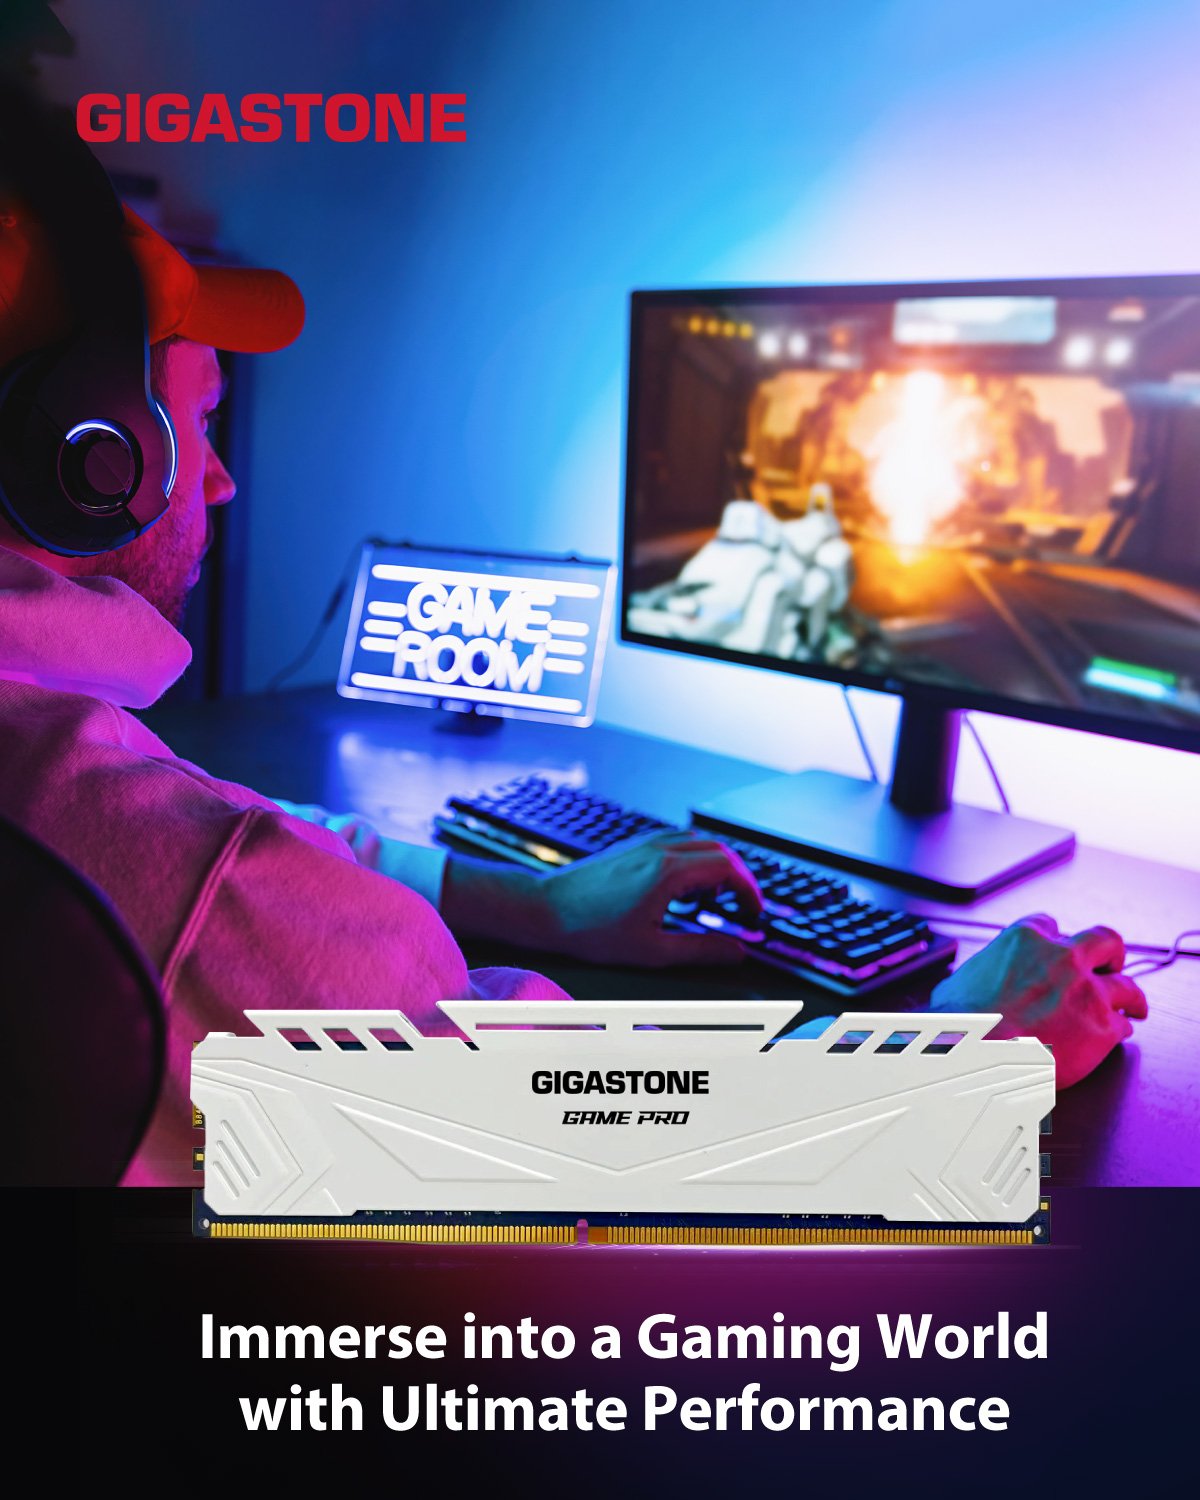 IMMERSE INTO A GAMING WORLD WITH ULTIMATE PERFORMANCE